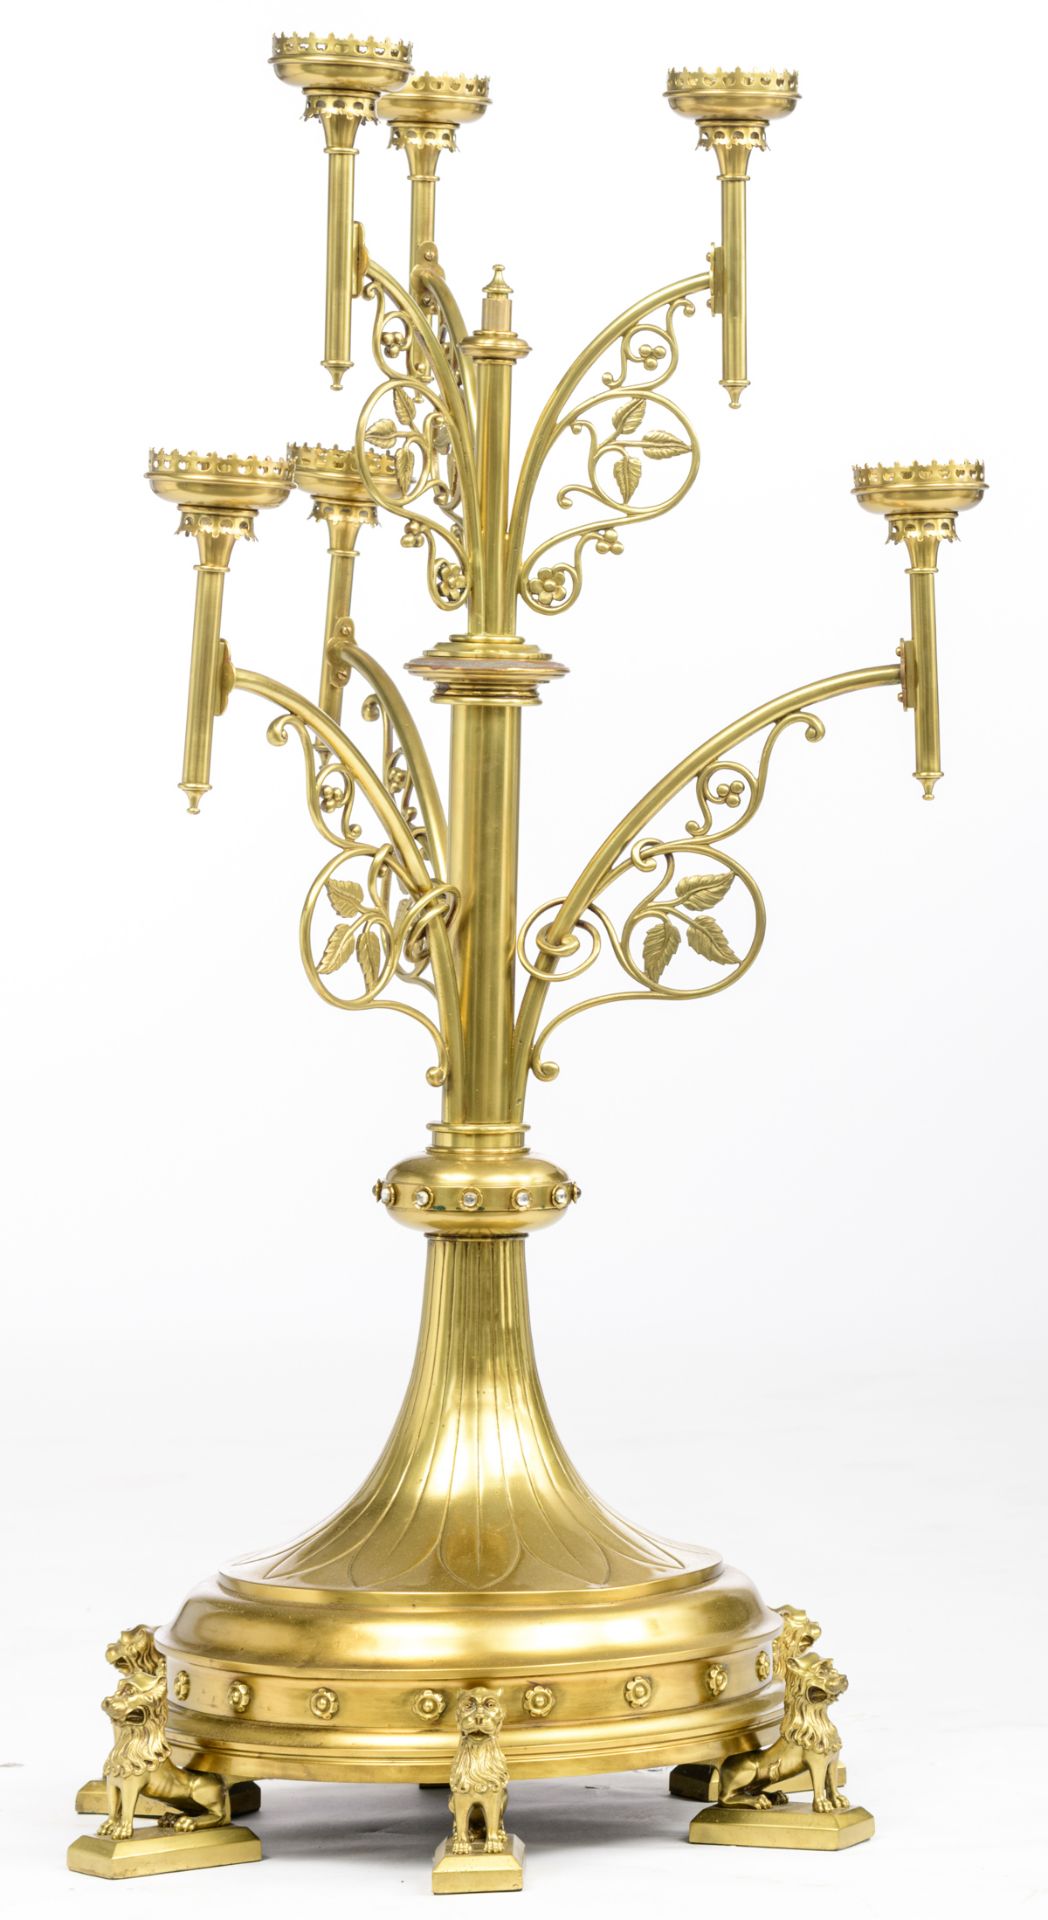 An imposing bronze Gothic Revival floor candelabra on lion-shaped feet, the six arms decorated with - Bild 4 aus 6